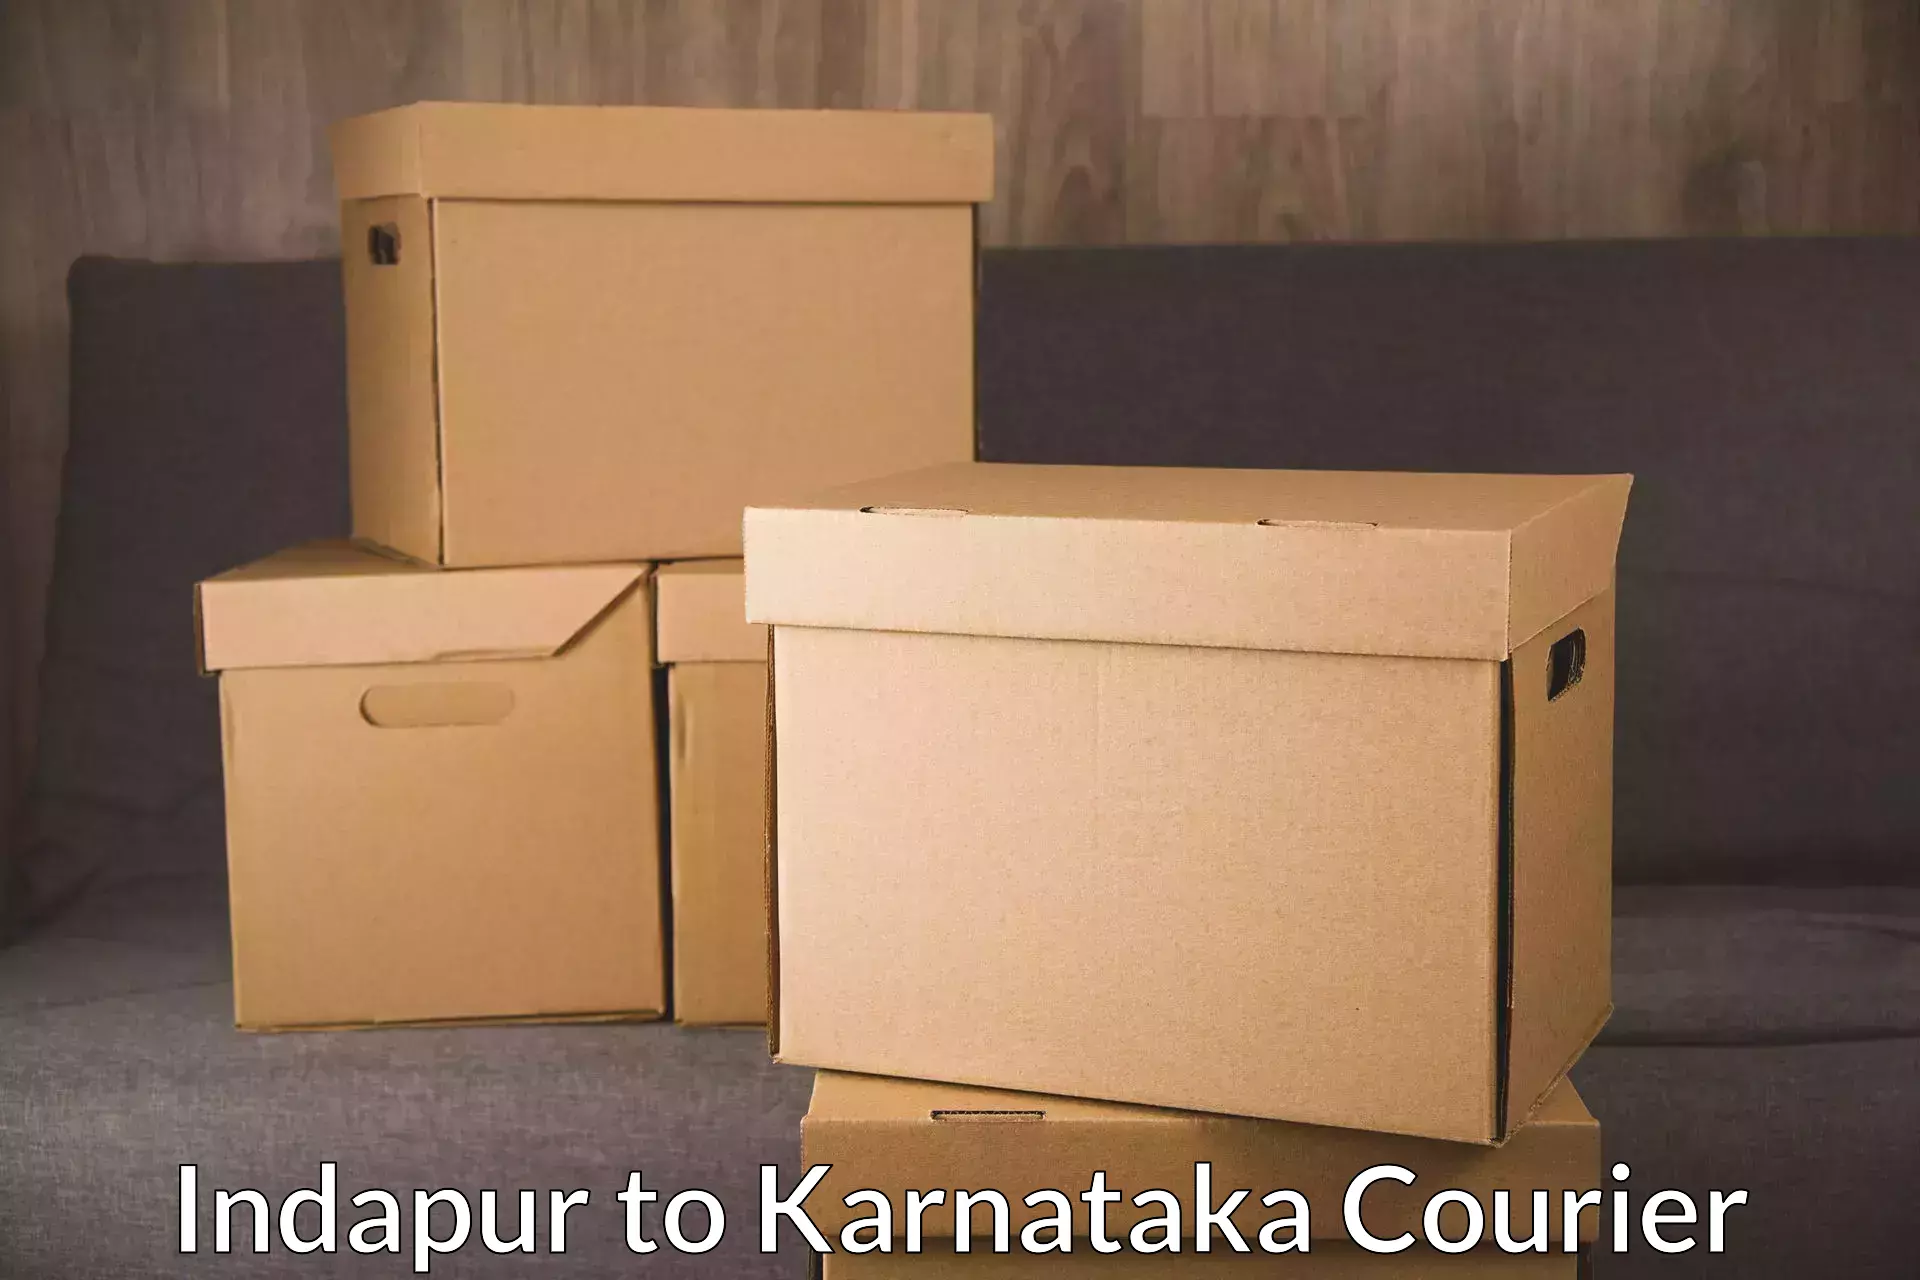 24-hour courier services Indapur to Manipal